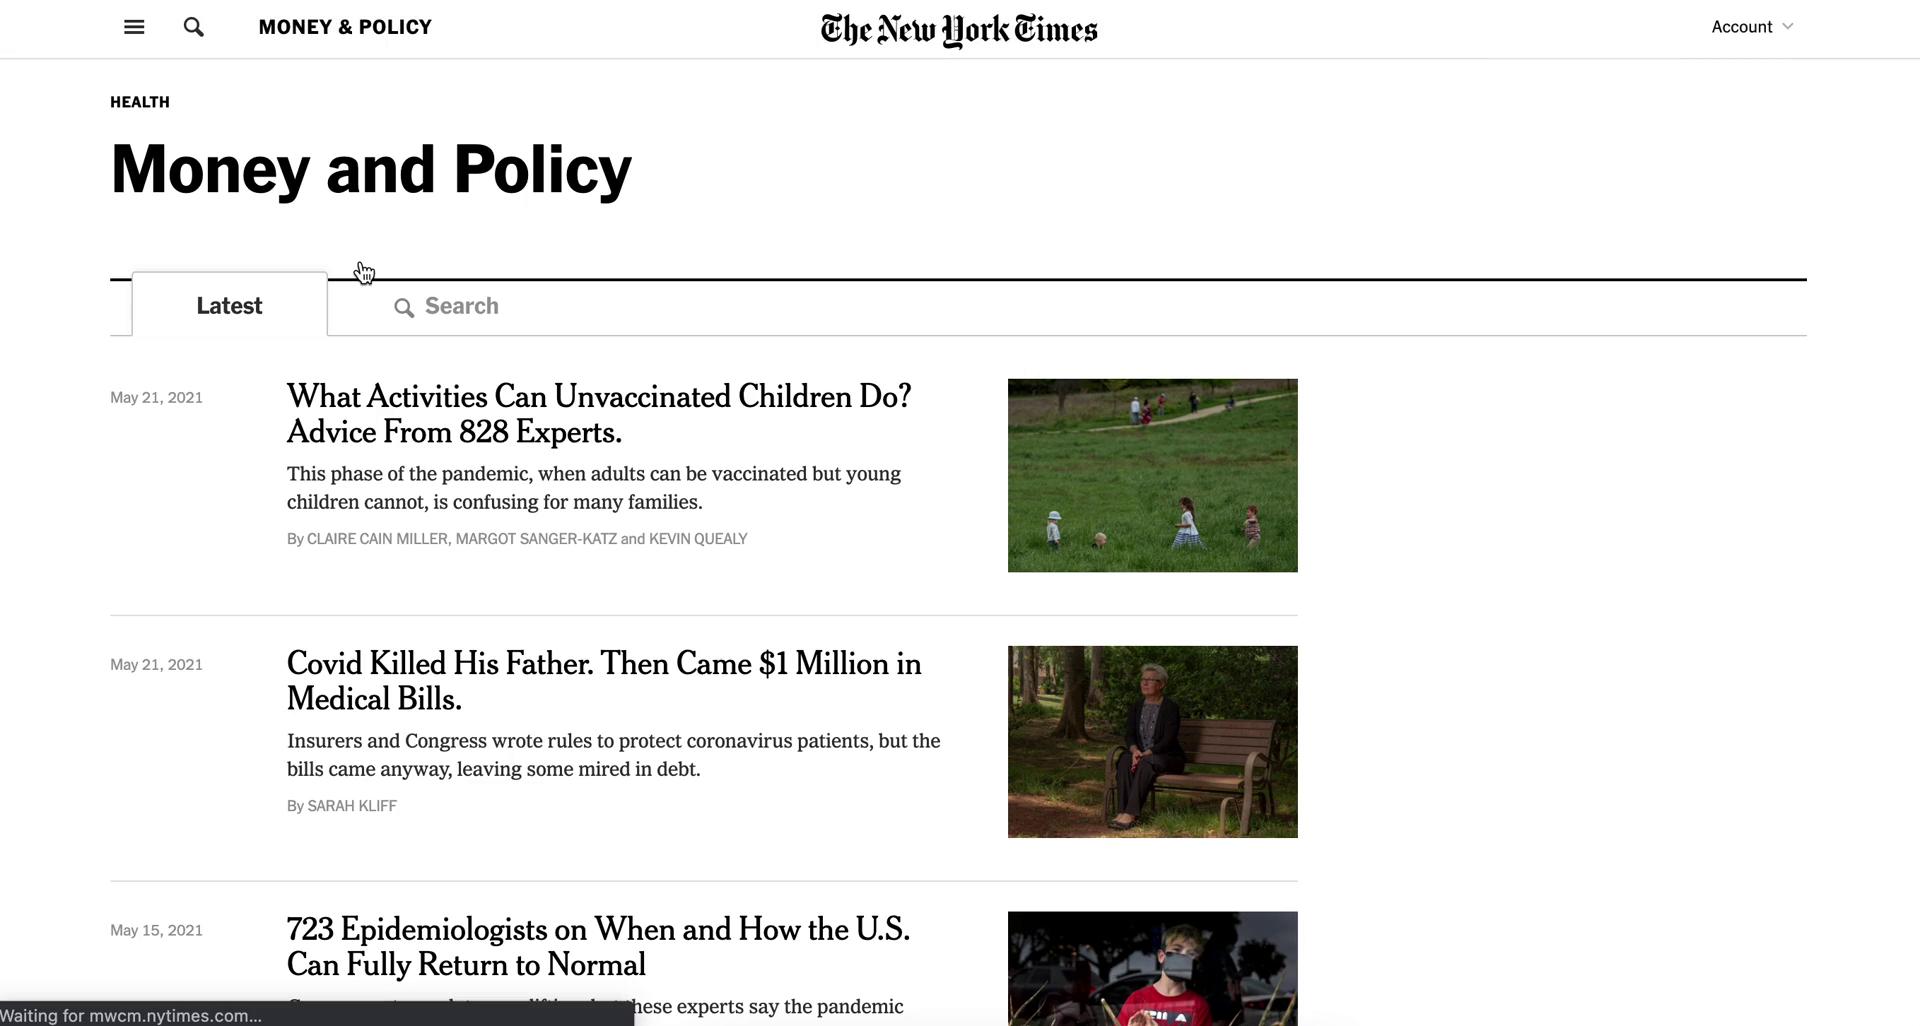 Screenshot of Category on Discovering content on The New York Times user flow